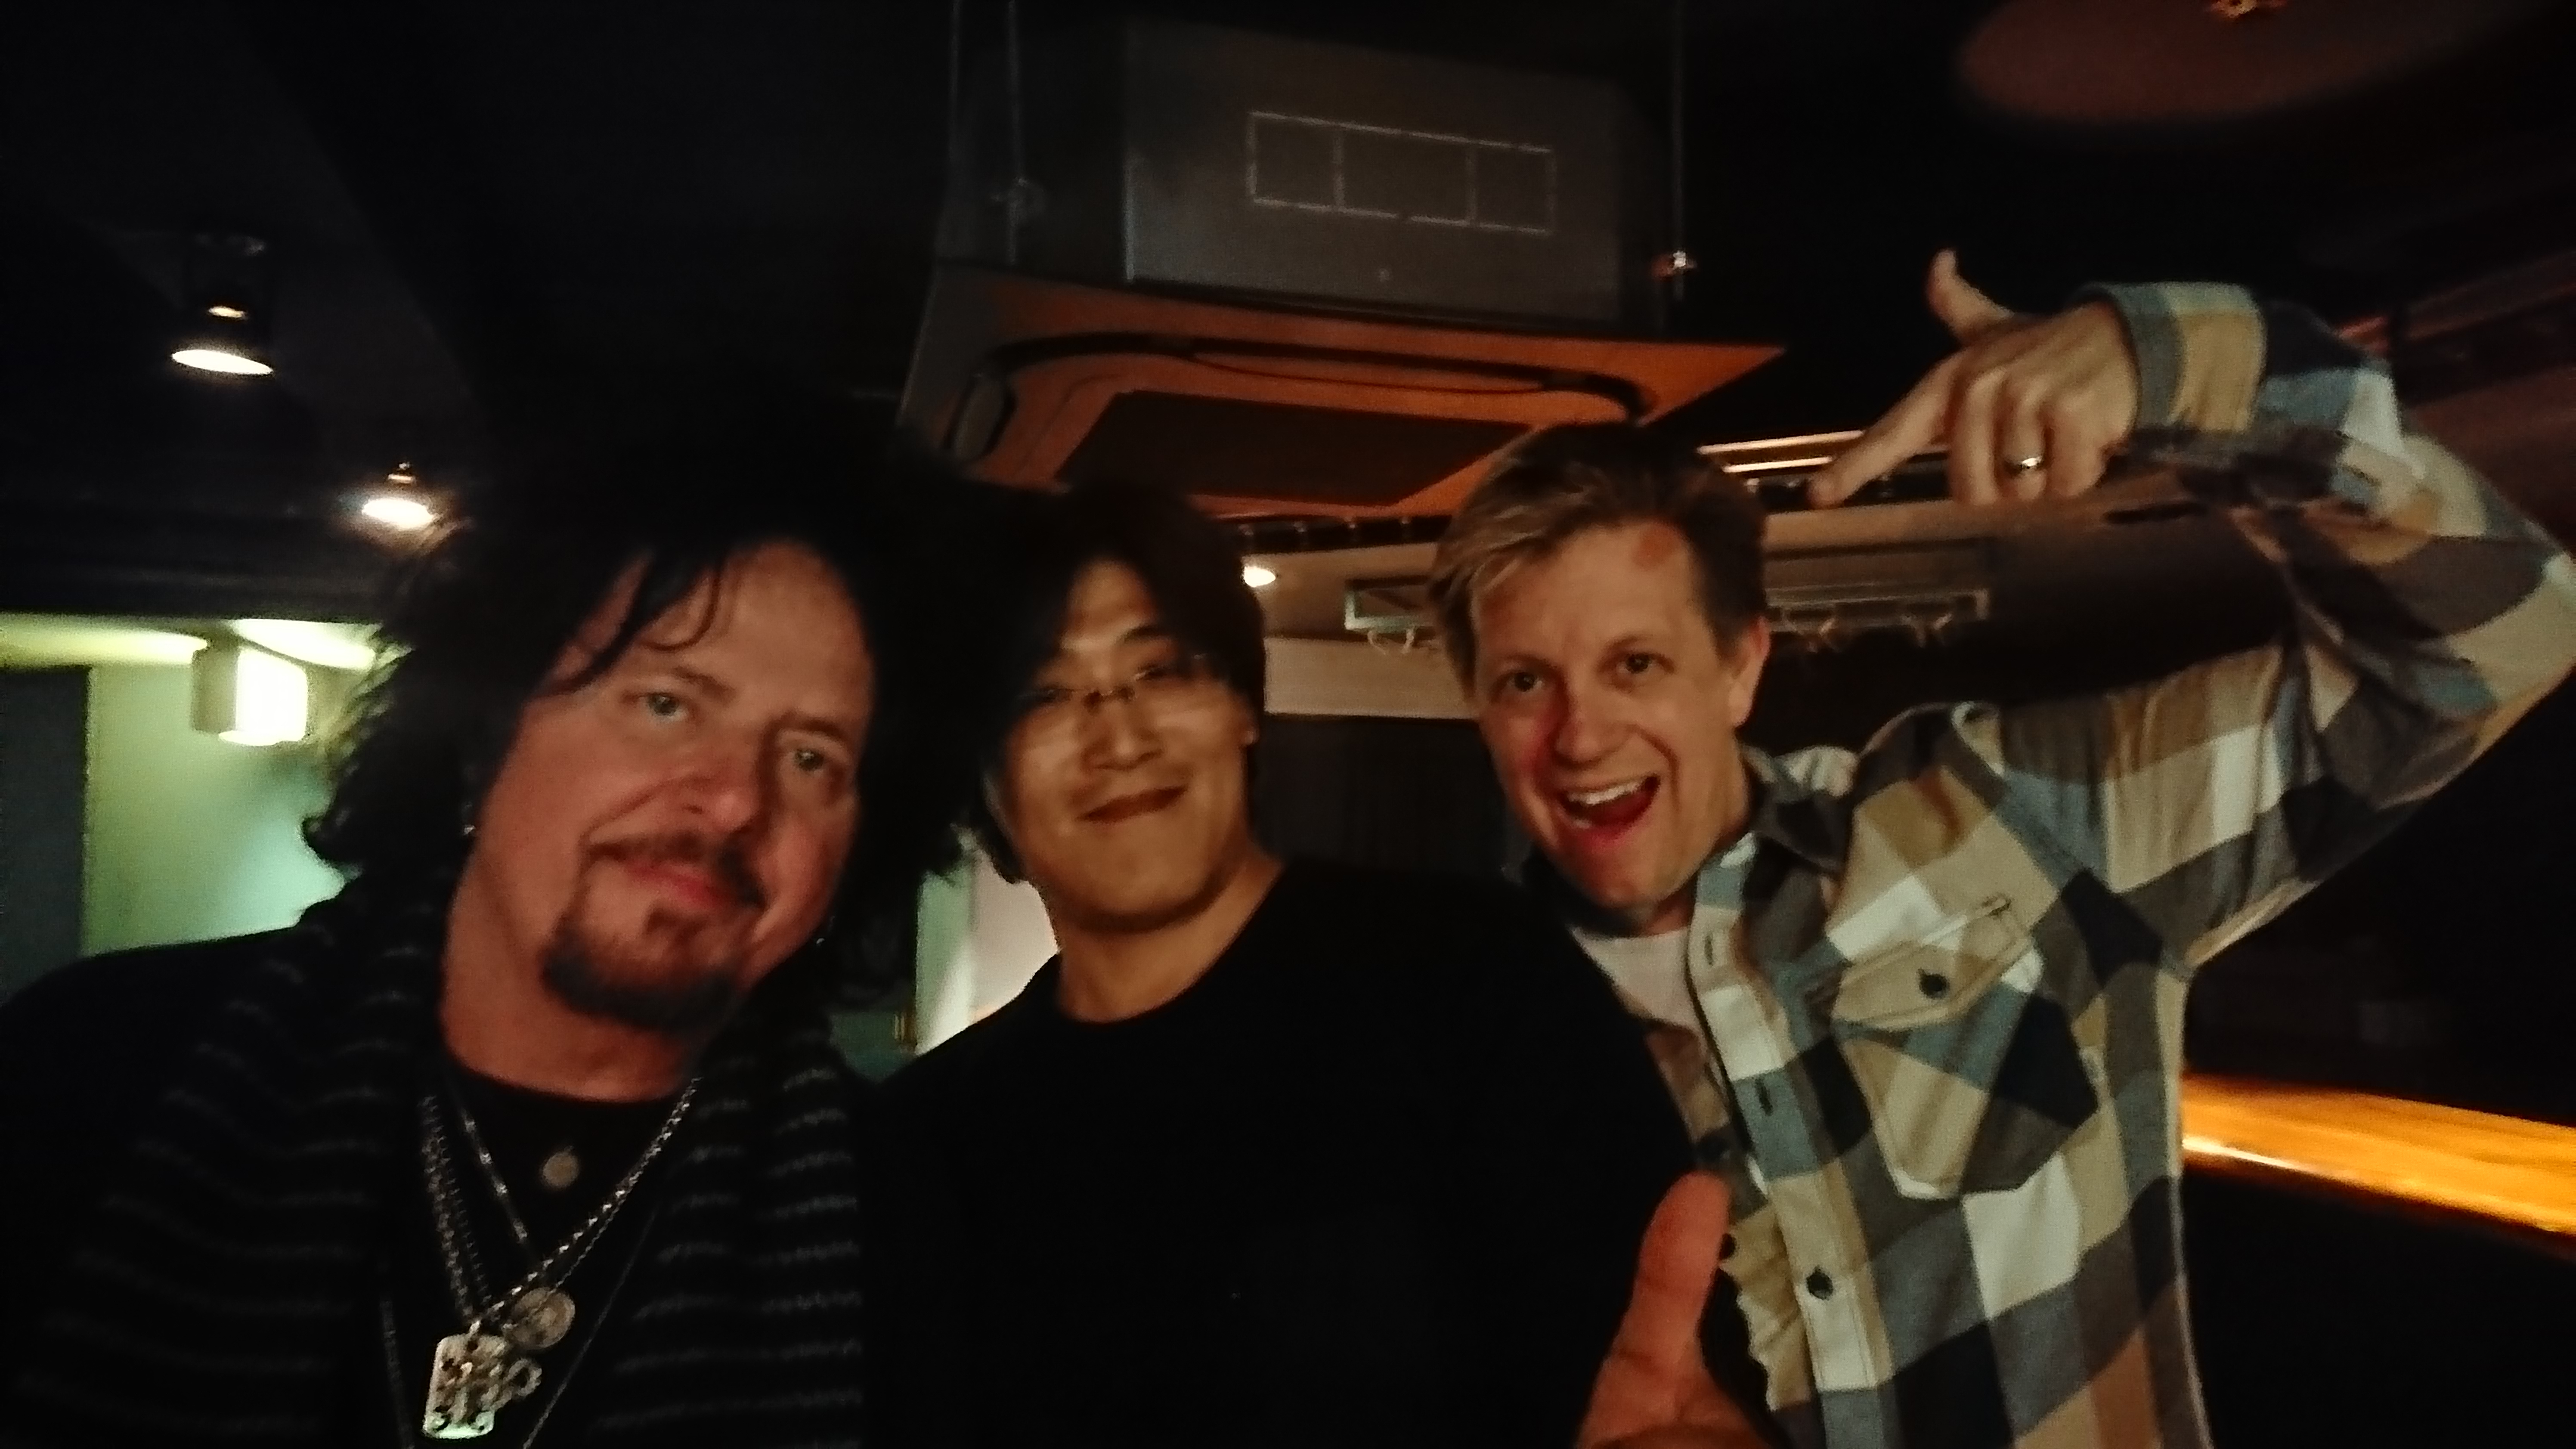 Steve Lukather 来日情報飛び込んできた！